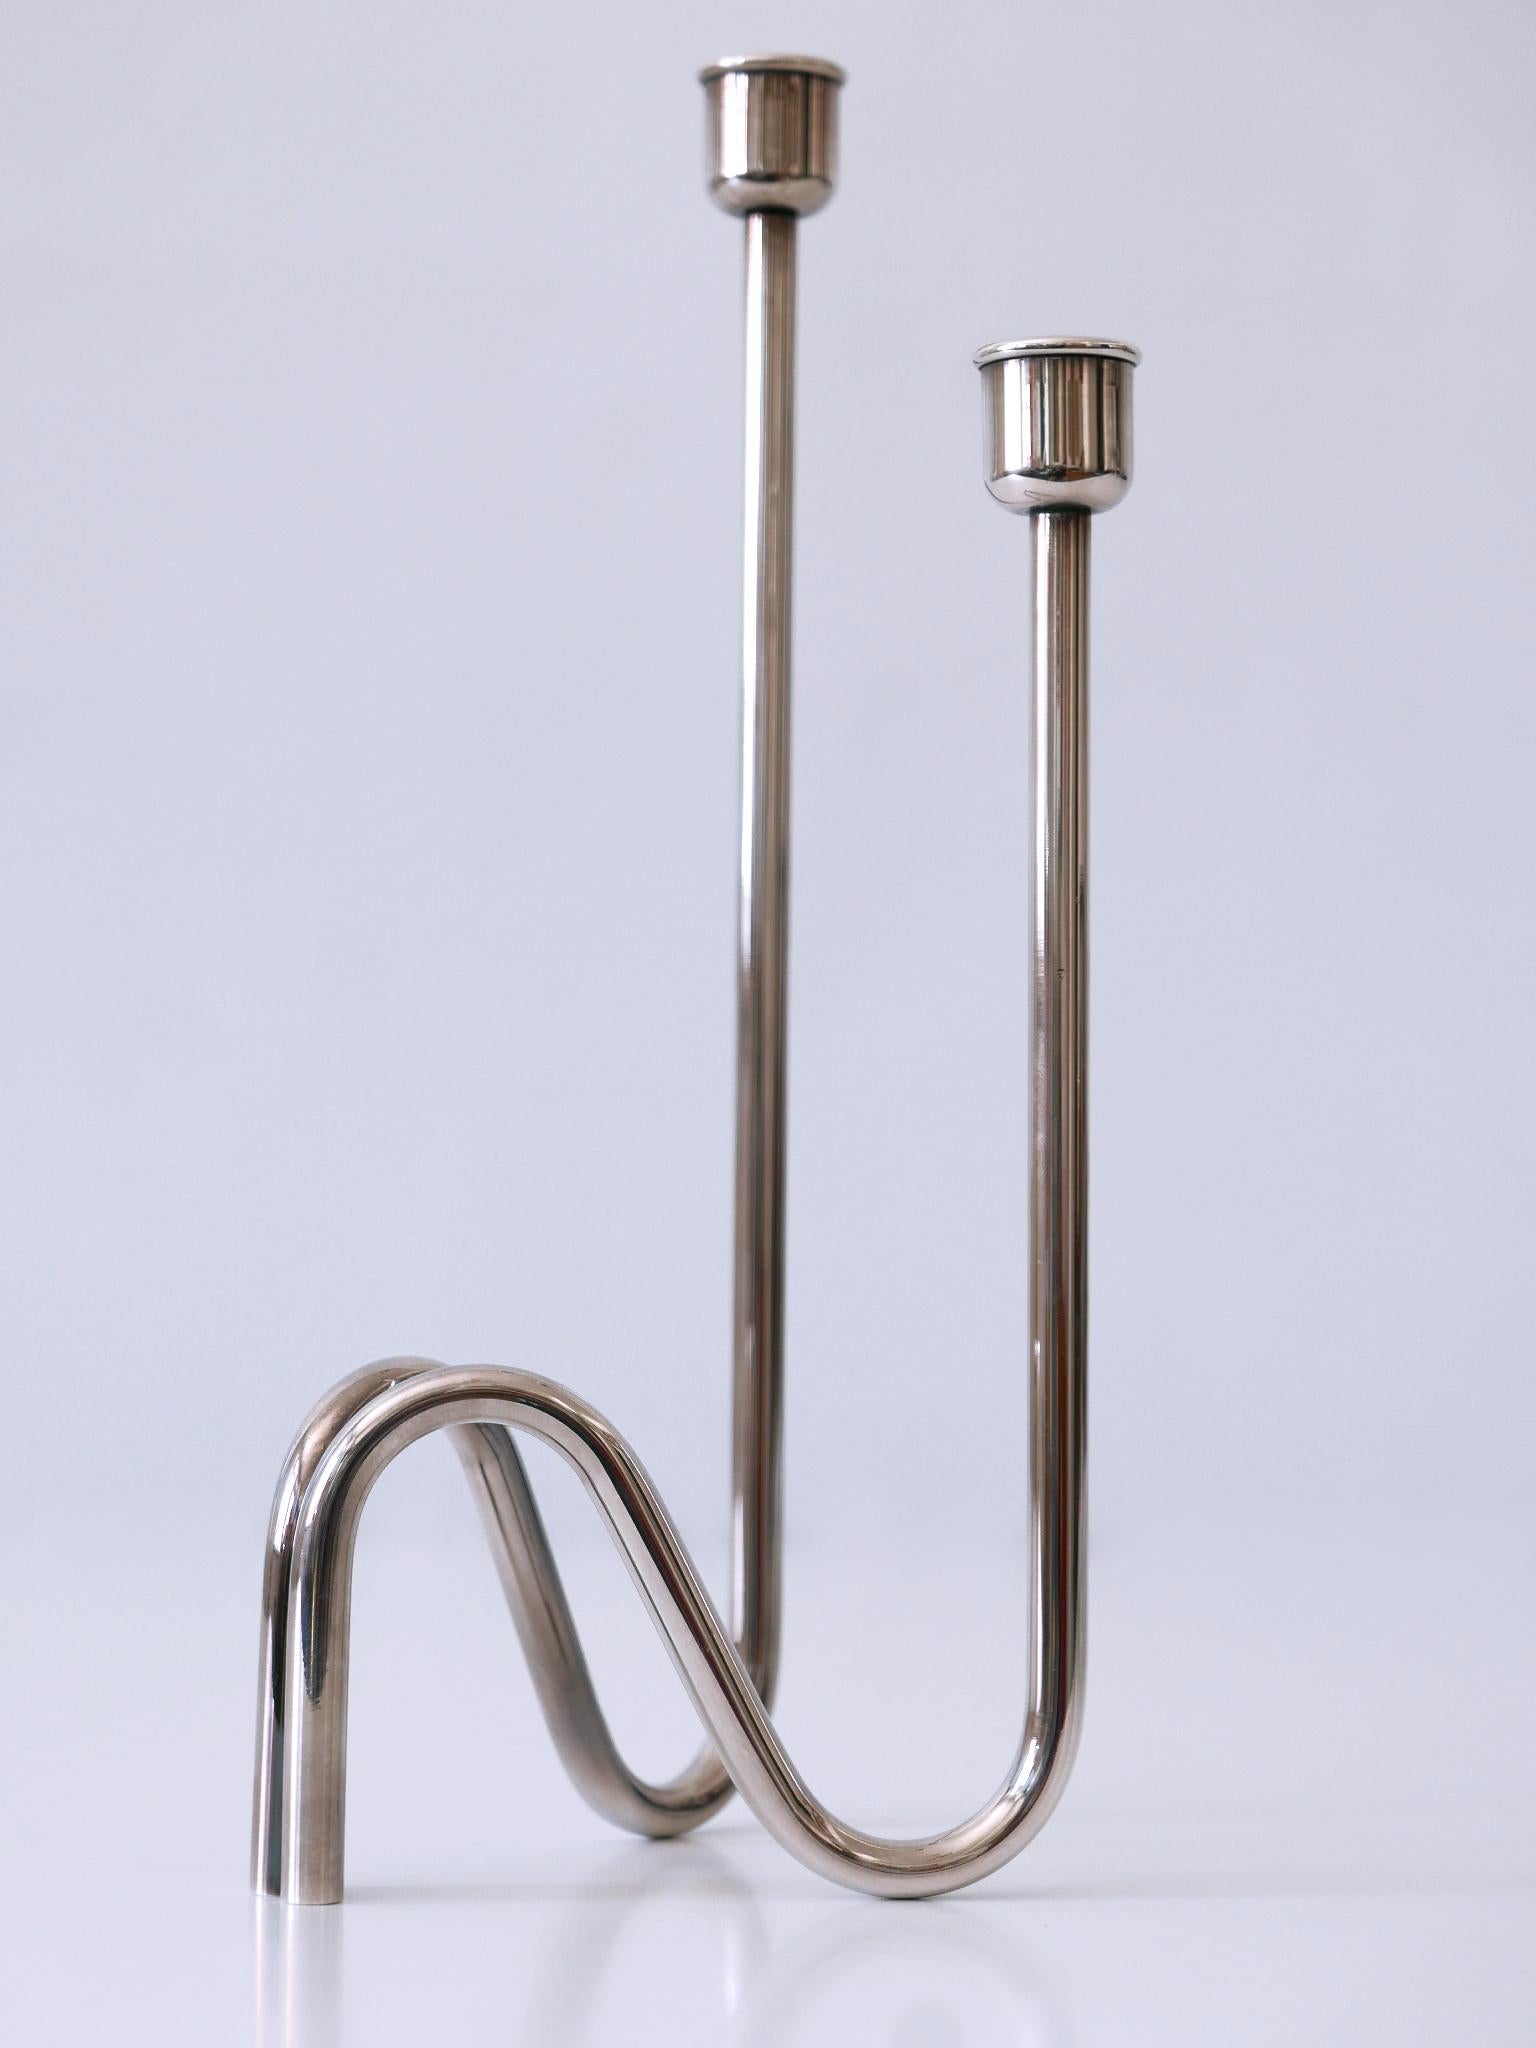 Elegant Mid-Century Modern Candle Holder Flamma by Lino Sabattini Italy 1970s In Good Condition For Sale In Munich, DE